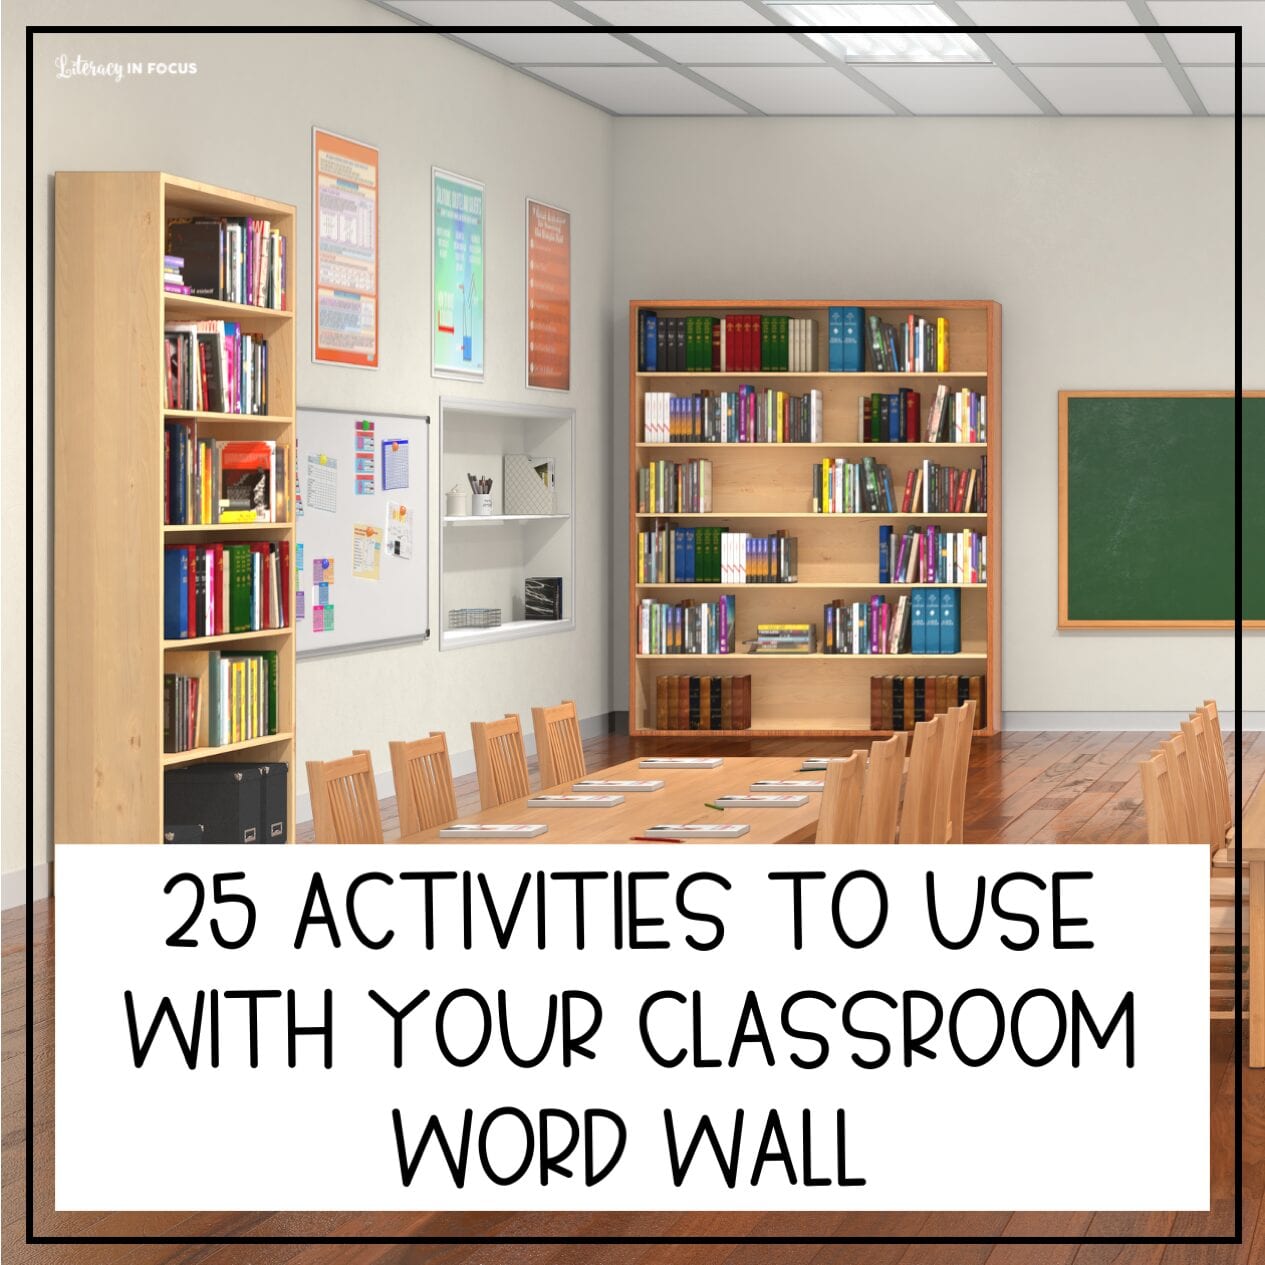 Word Wall Activities and Ideas